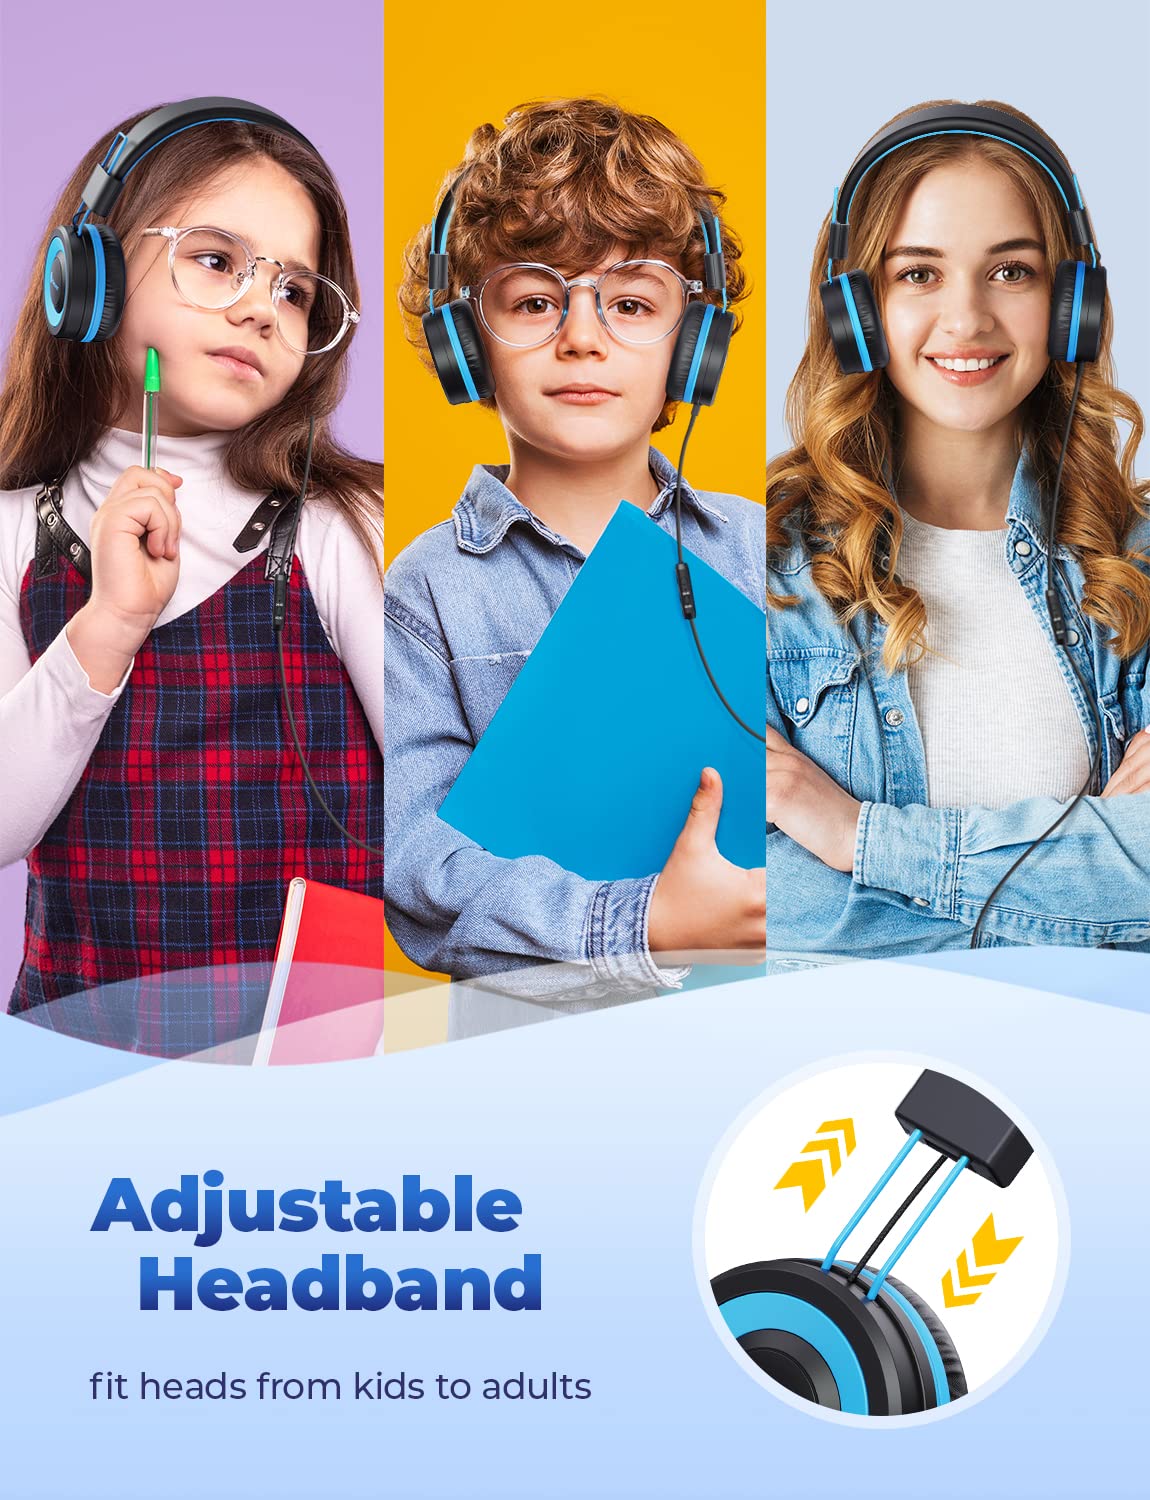 iClever HS14 Kids Headphones, Headphones for Kids with 94dB Volume Limited for Boys Girls, Adjustable Headband, Foldable, Child Headphones on Ear for Study Tablet Airplane School, Black, Blue